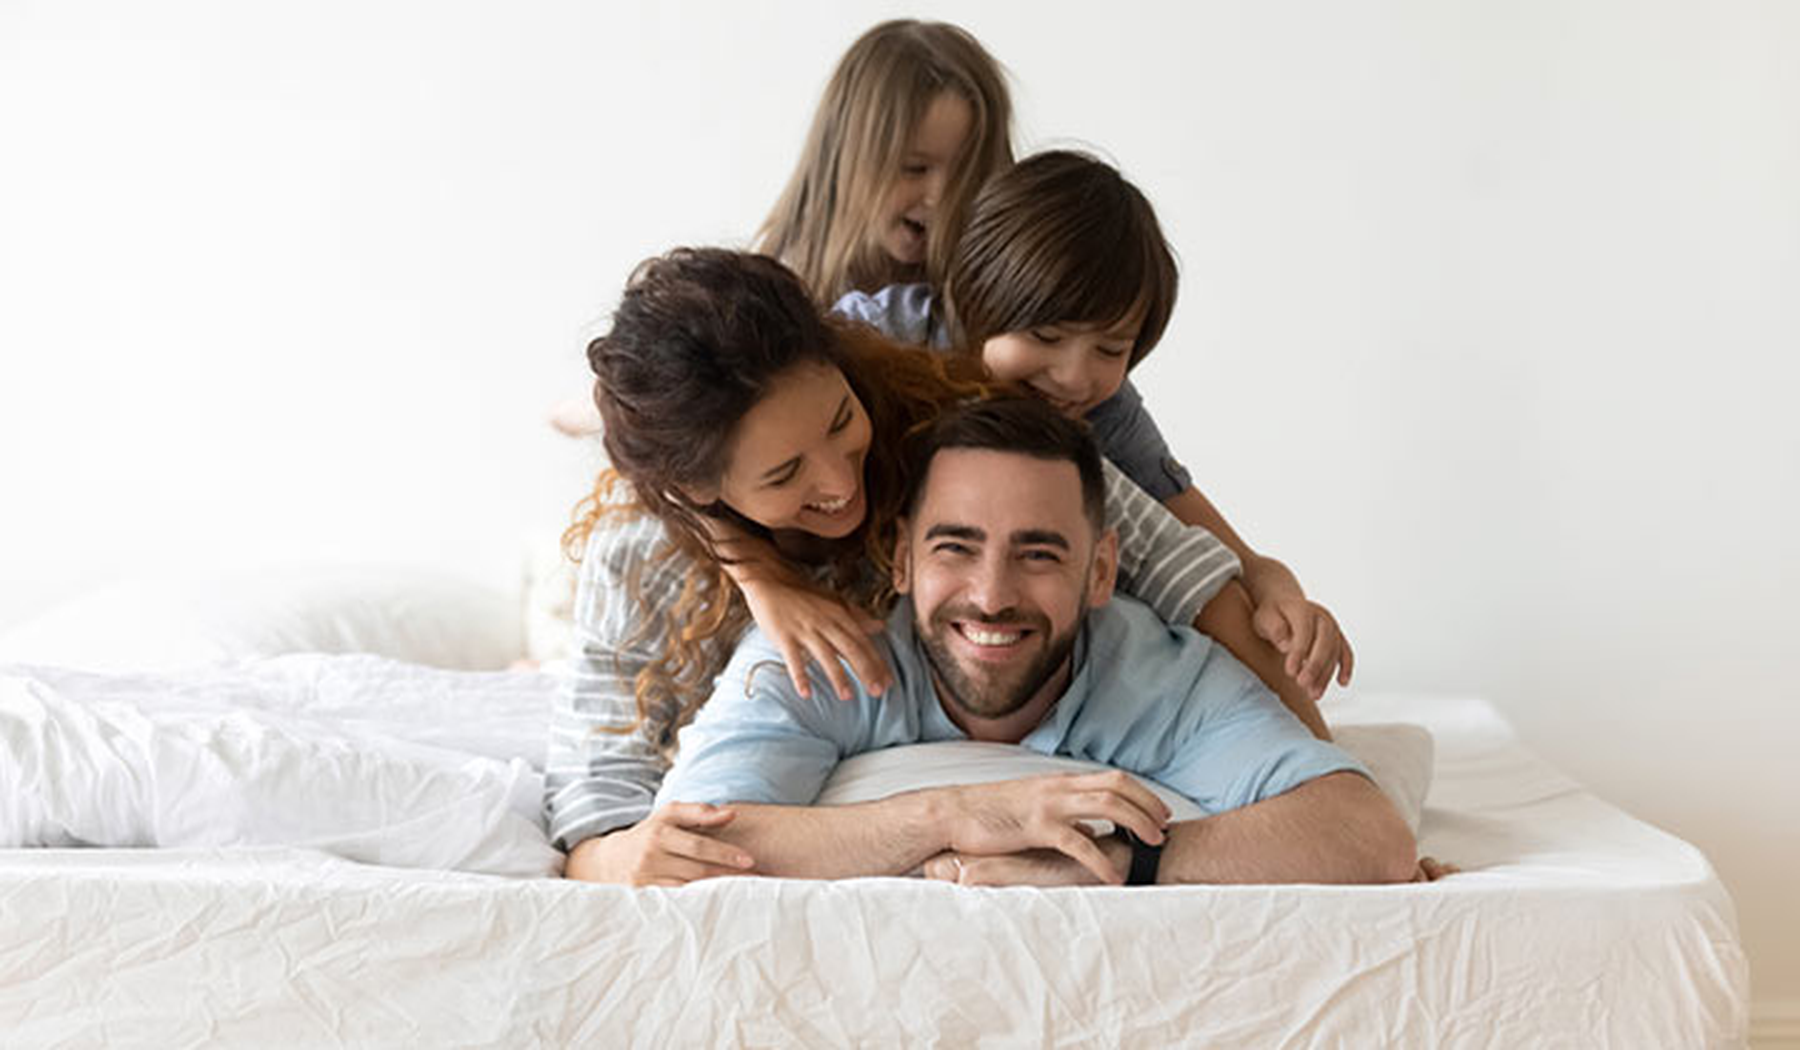 Smiling family piled on a bed